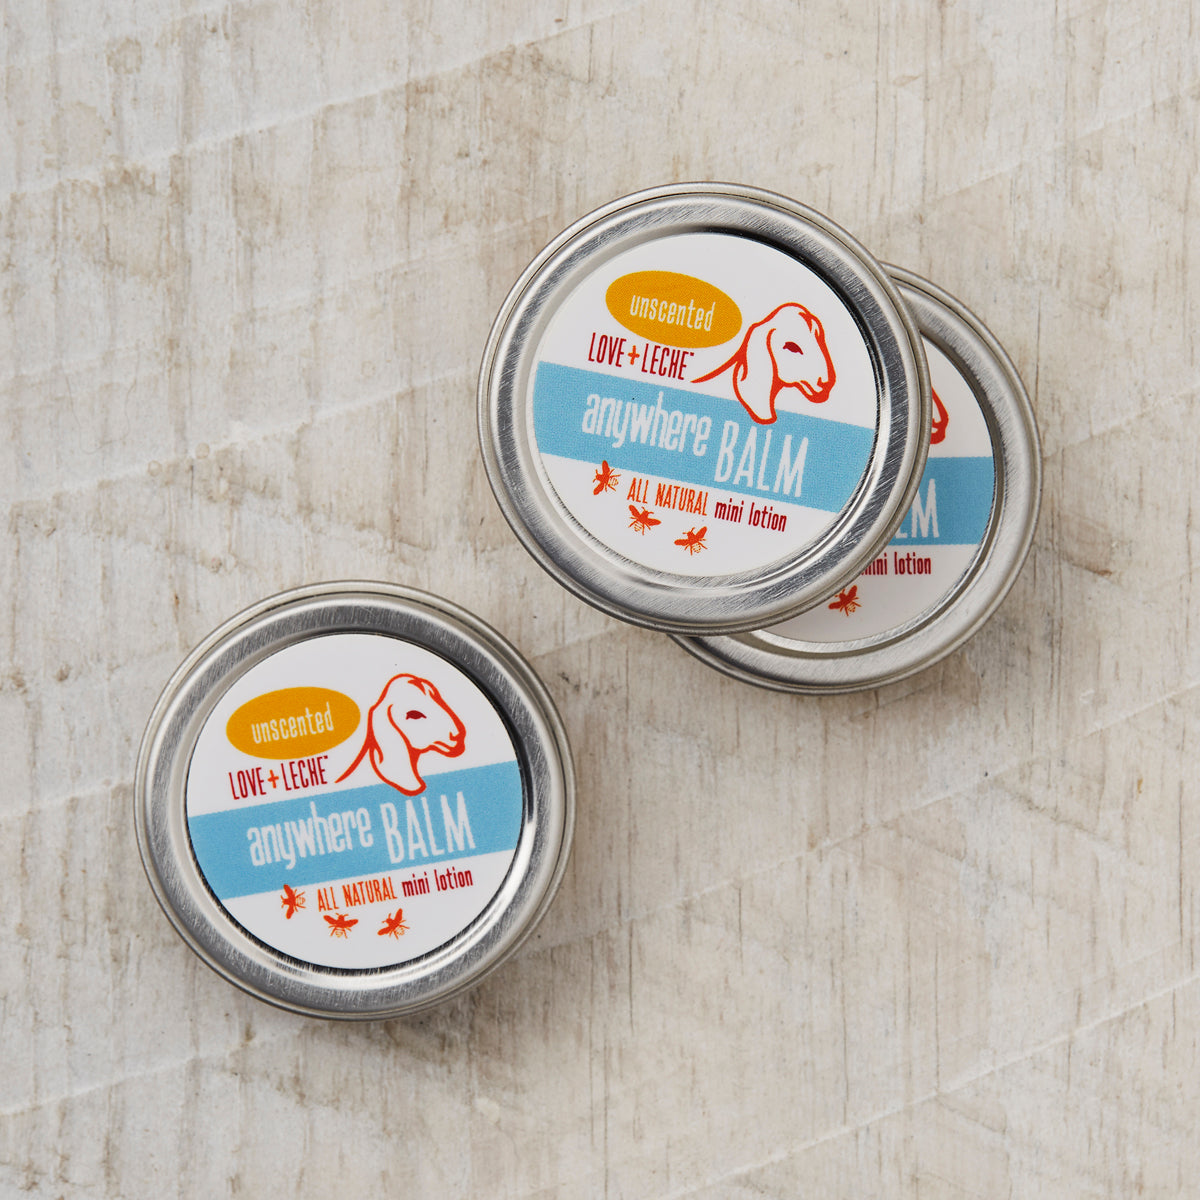 Unscented - Anywhere Balm